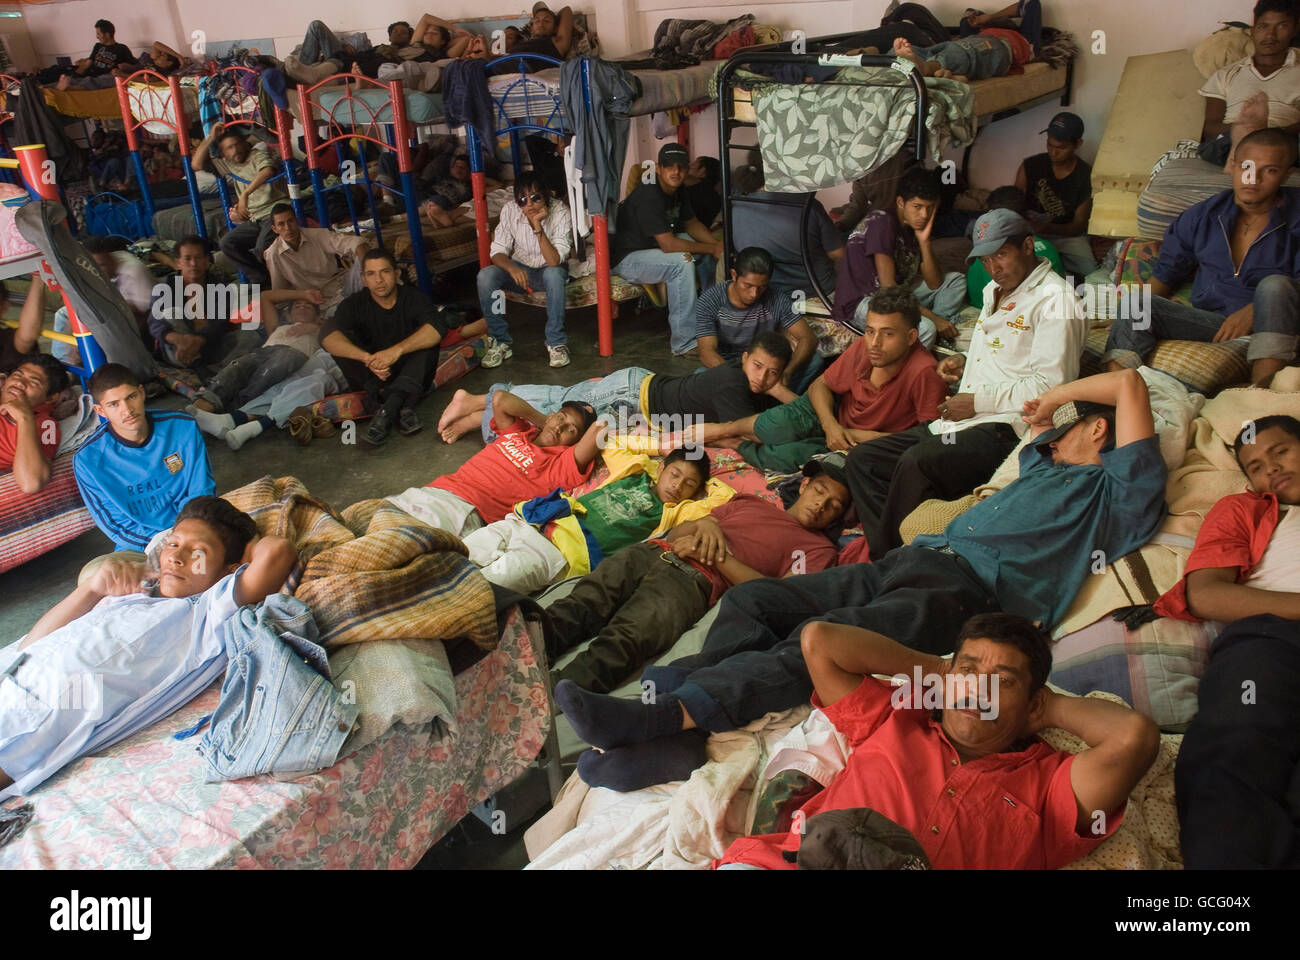 Central American migrants live together at a shelter in Tultitlan, Mexico in extremely overcrowded conditions. Stock Photo